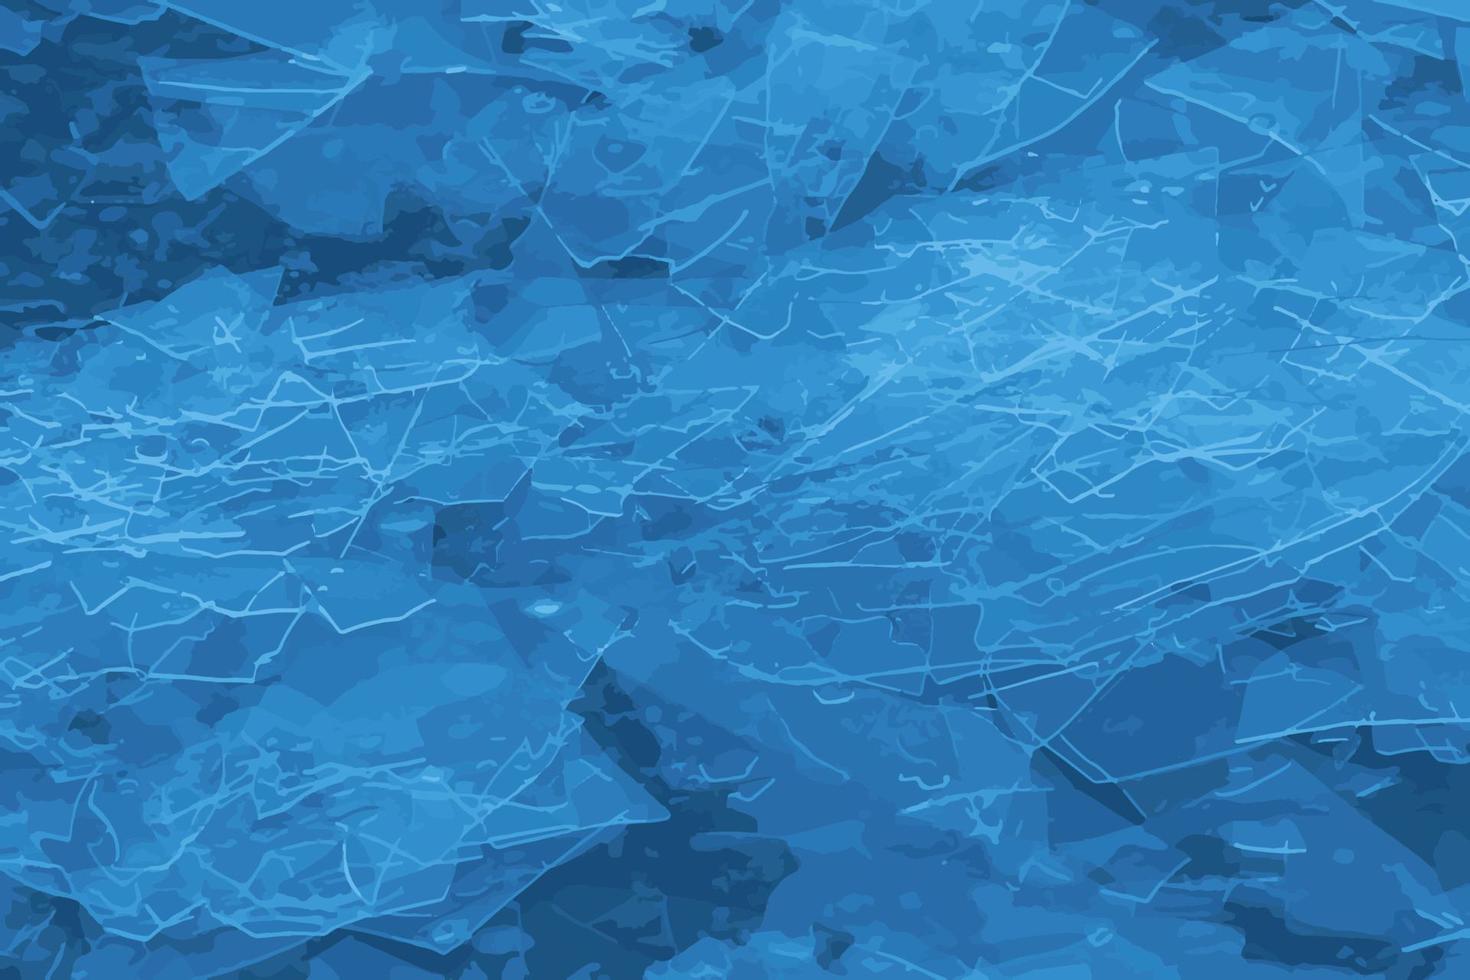 Realistic vector illustration of an ice surface of the river. Texture of ice shards. Winter background.